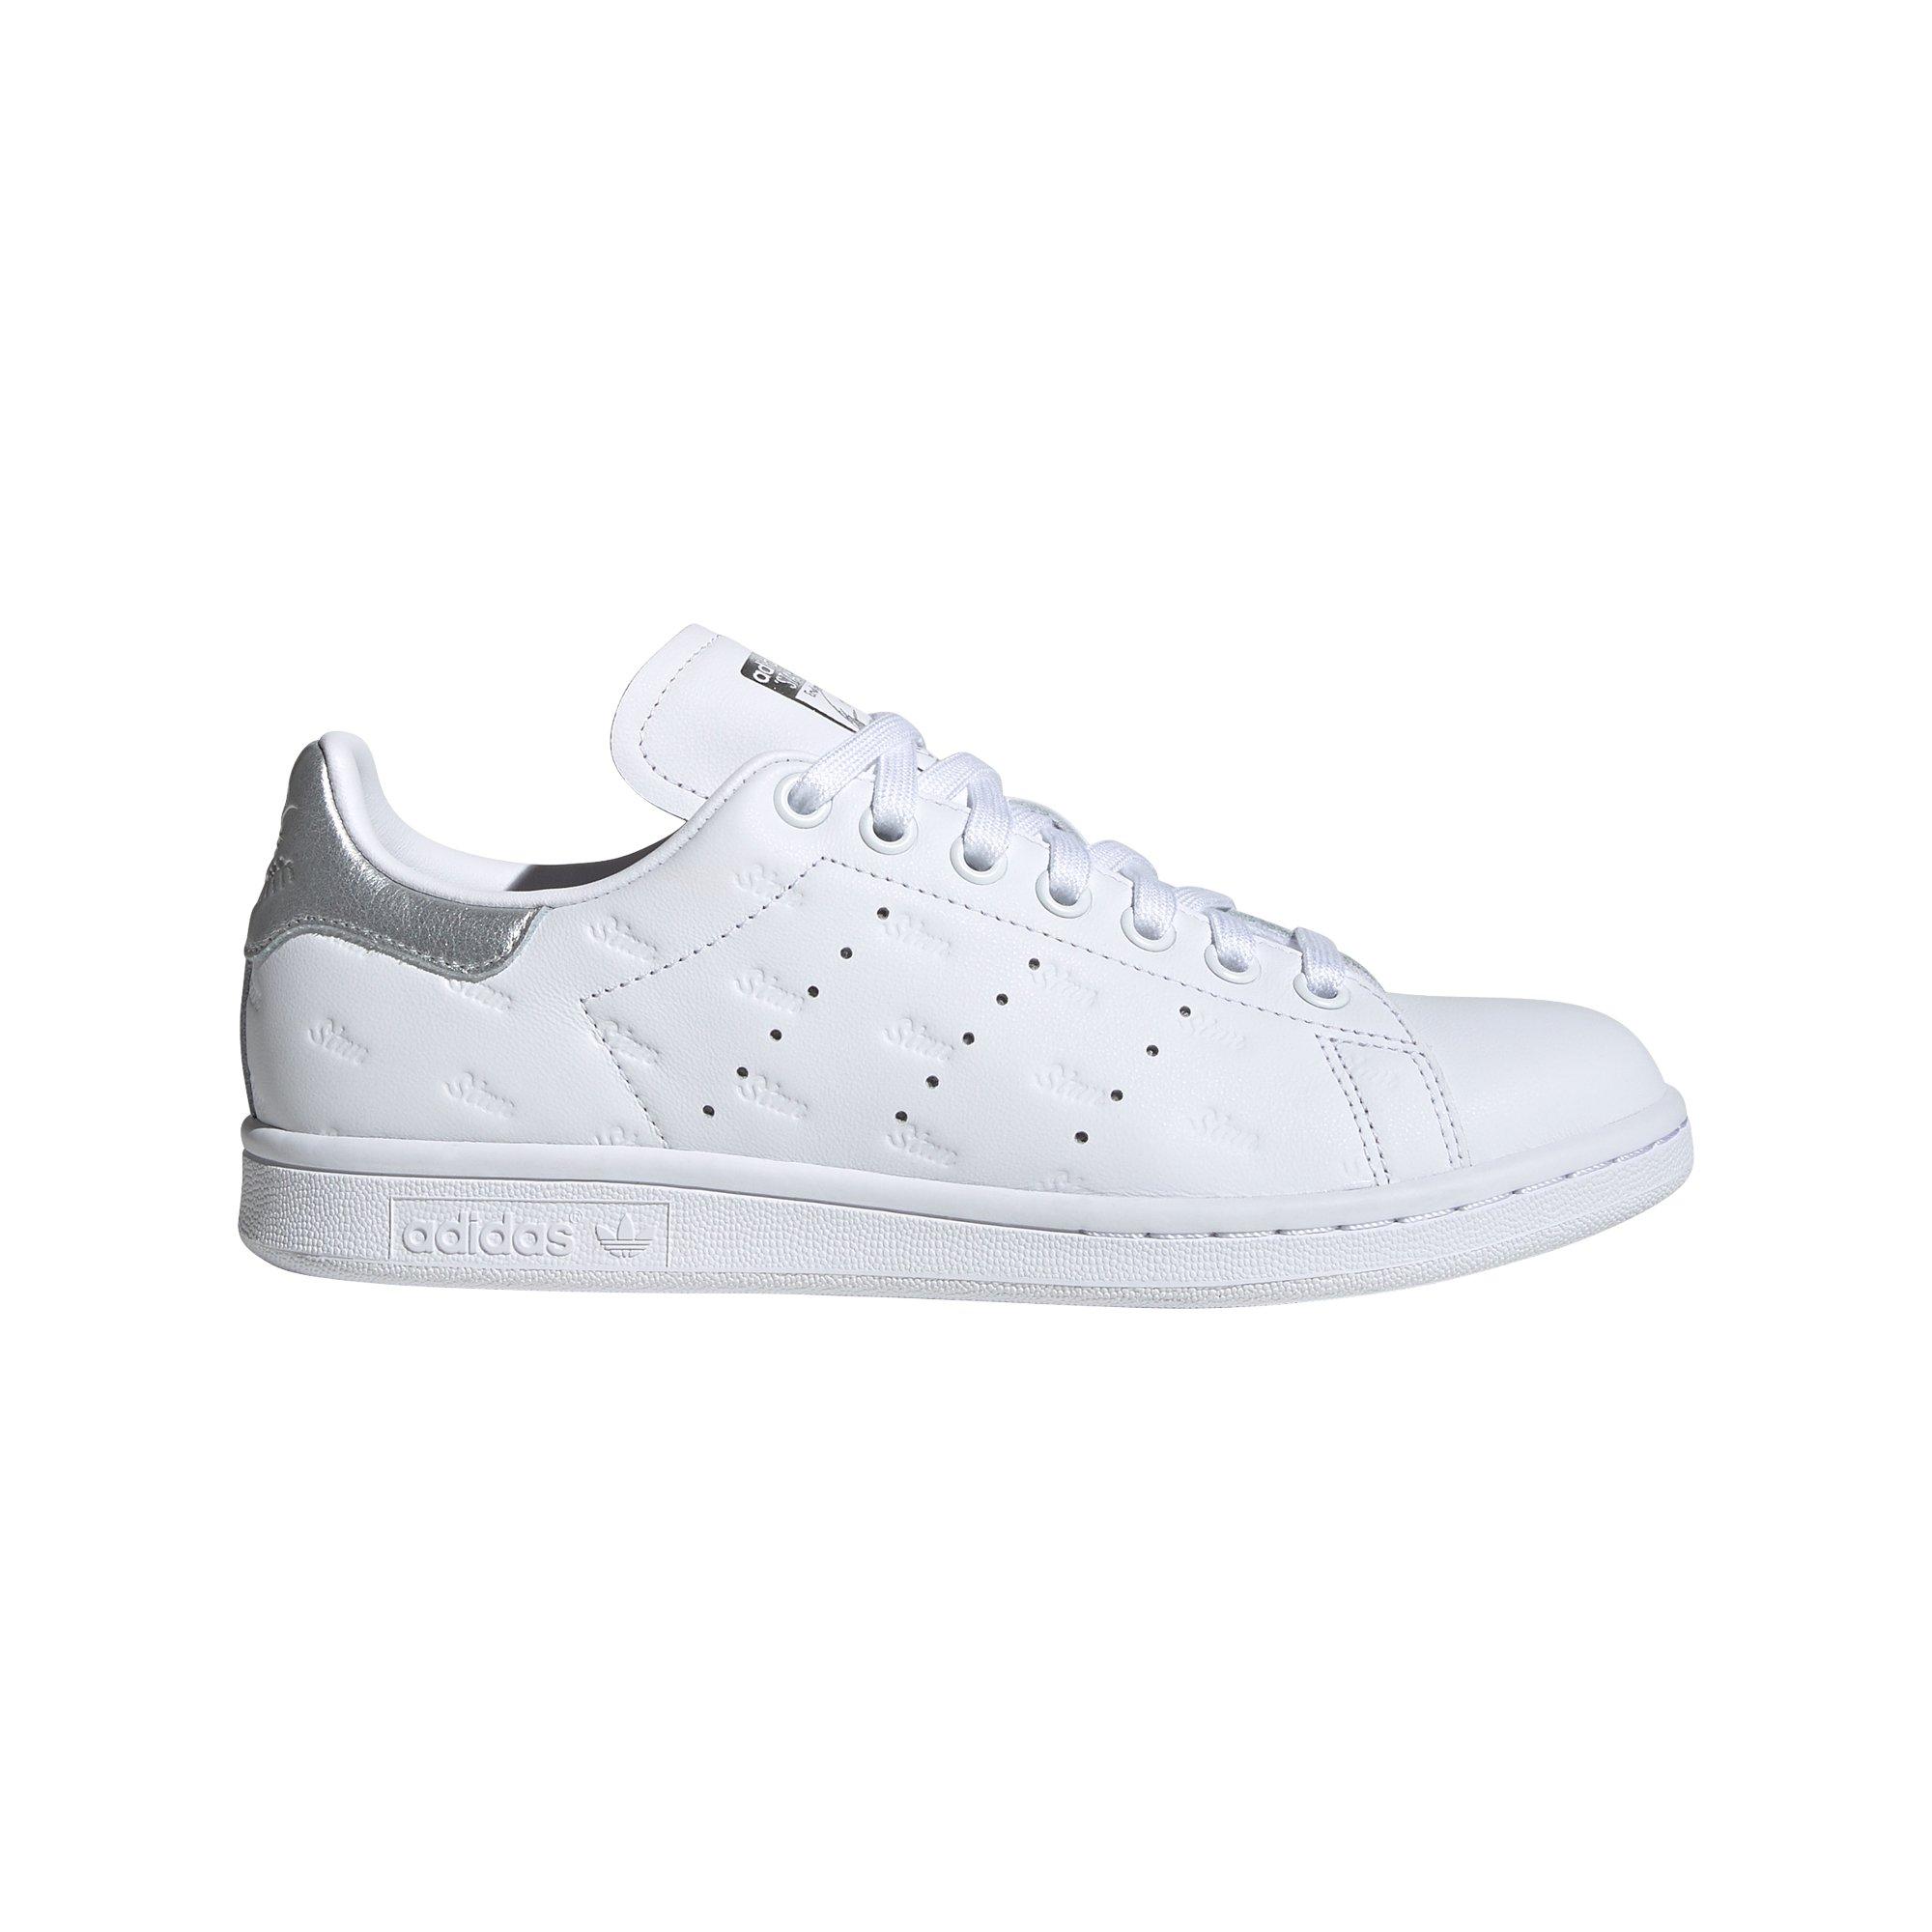 white and silver stan smith